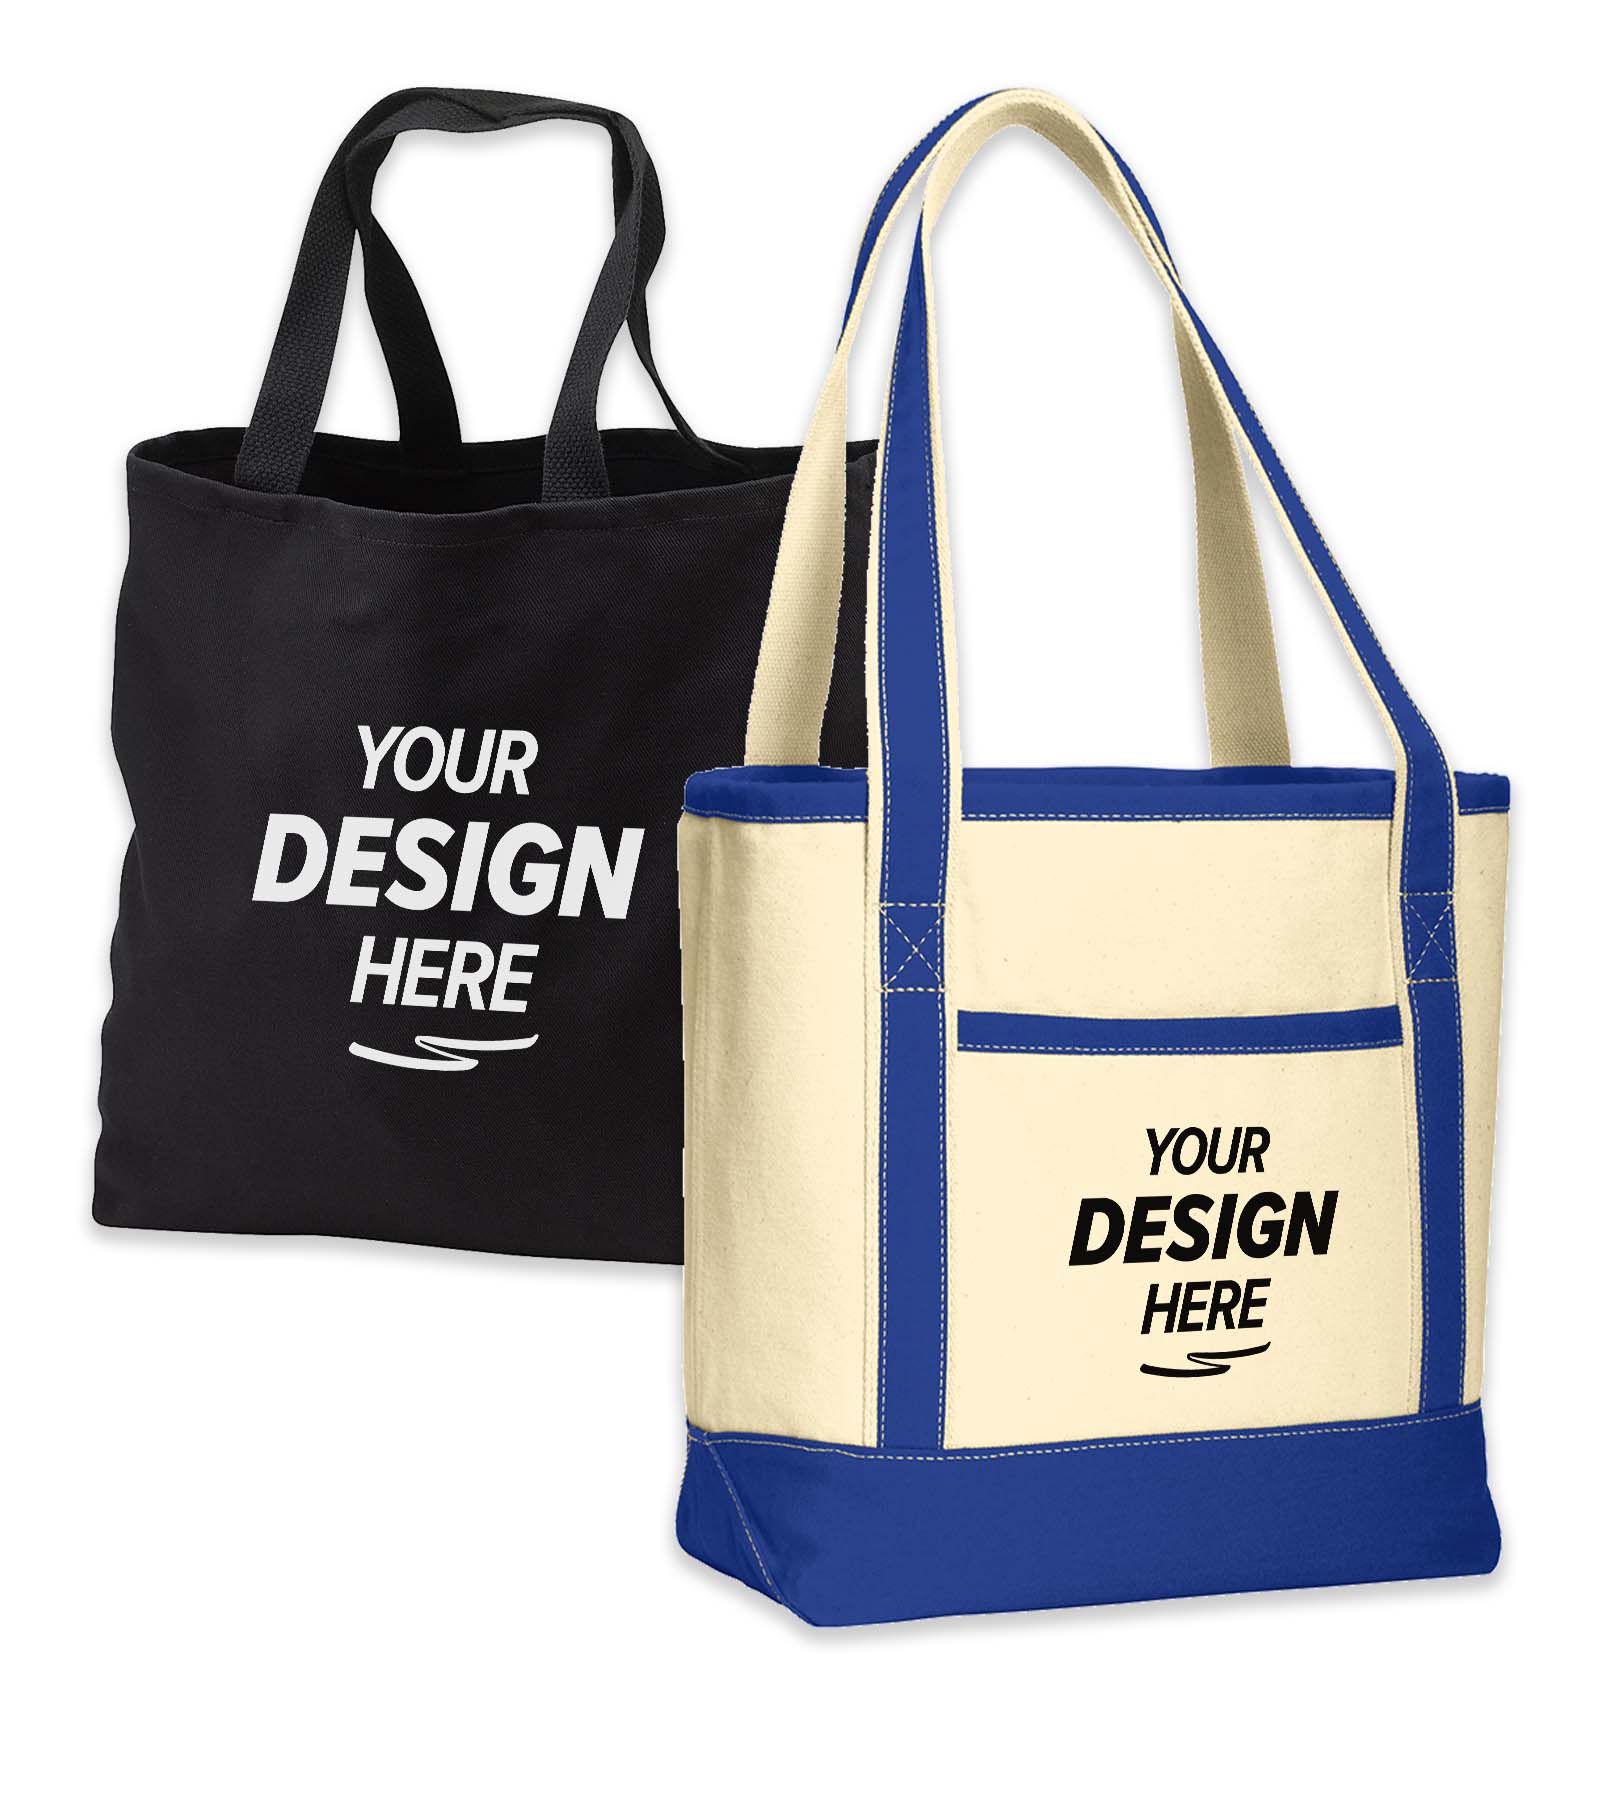 Custom Tote Bags Seattle Screen Printing  Promotional Products